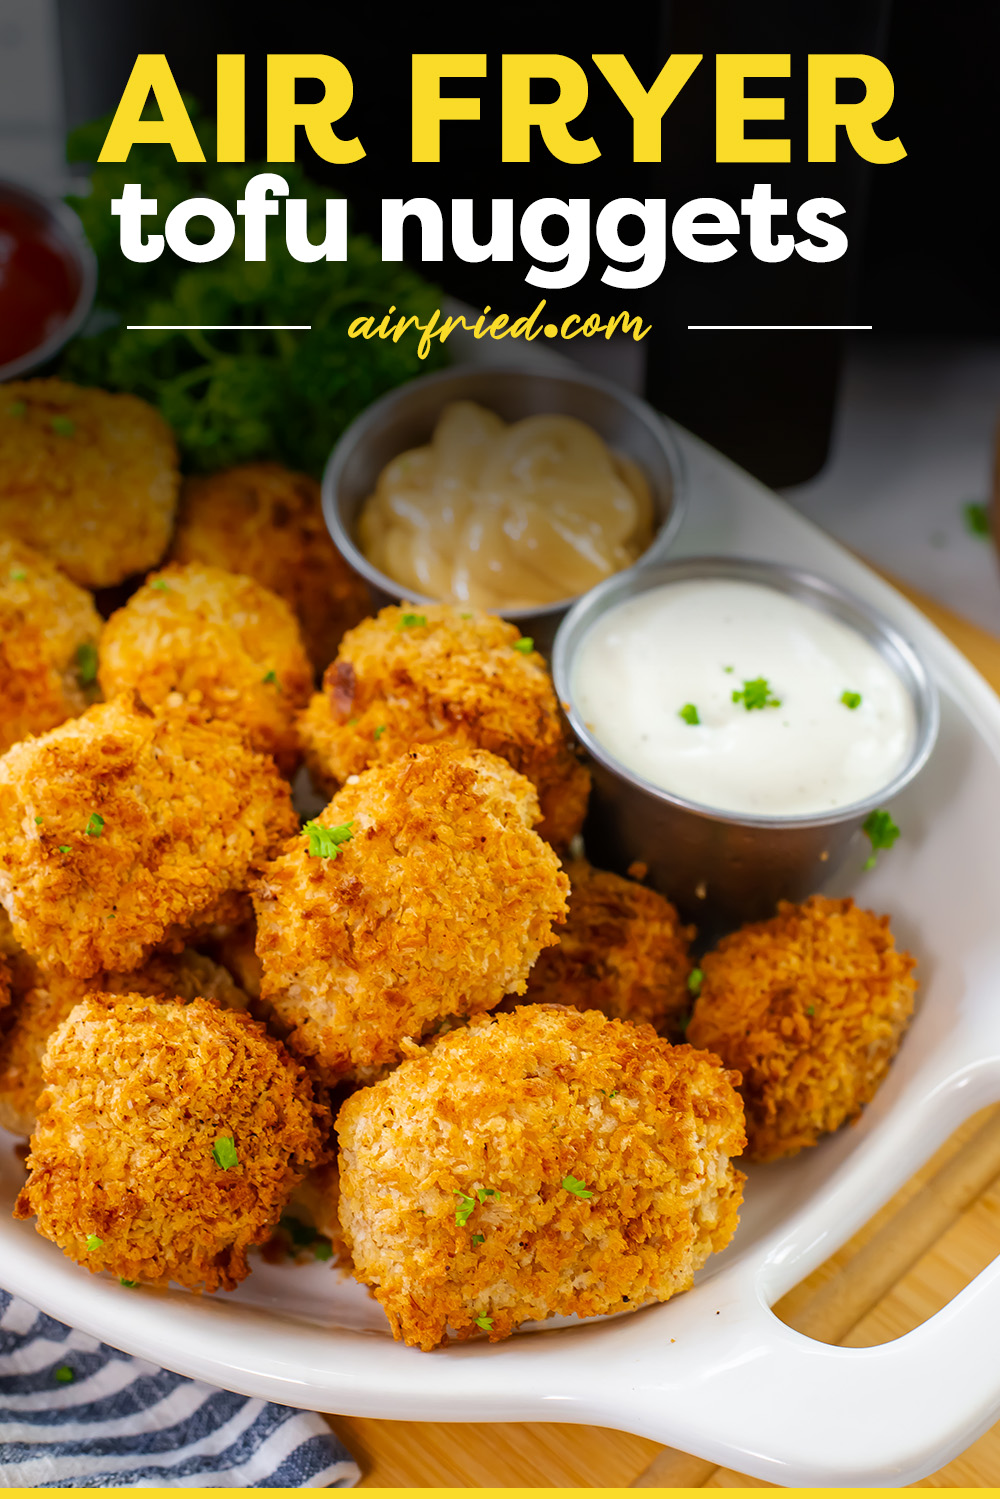 You can make wonderful tofu nuggets with a crispy breading in your air fryer!  Great options for a snack or a main dish!